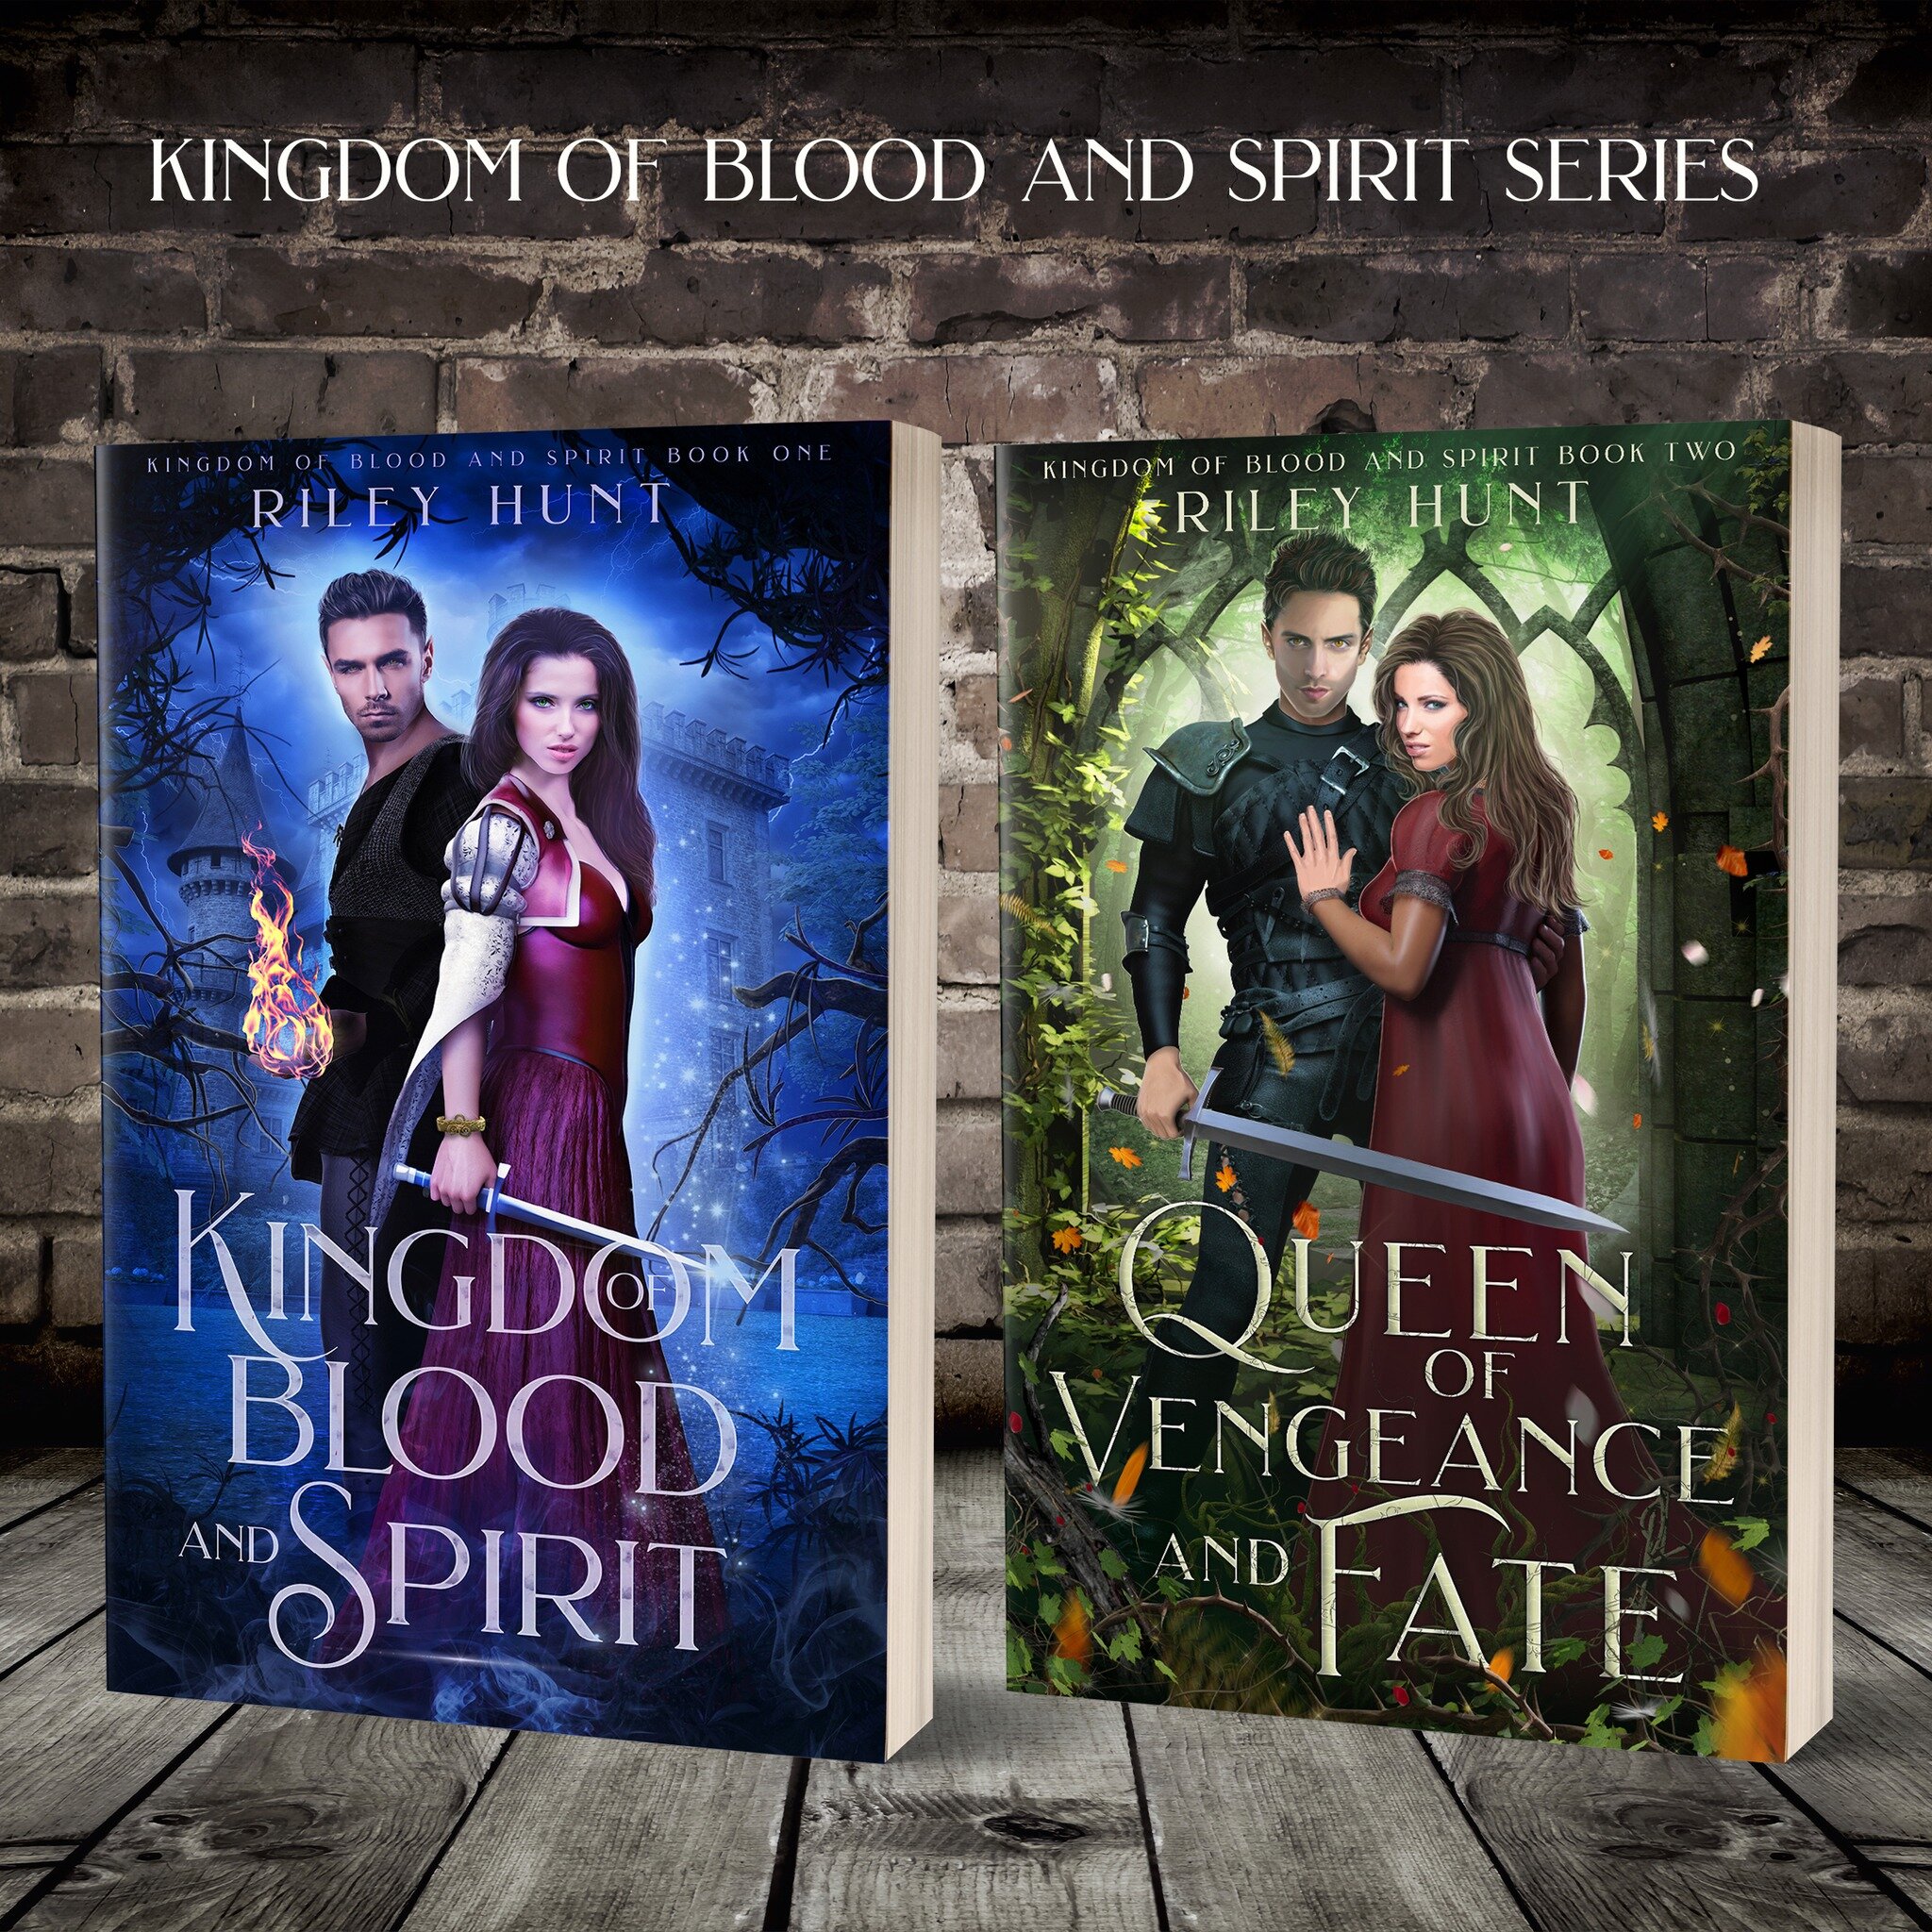 Book One of Kingdom of Blood and Spirit is available now! Book Two releases April 25th preorder now!!
&quot;Immerse yourself in a realm of magic, danger, and forbidden love. Samantha's quest to warn the mortal lands becomes a race against time as she